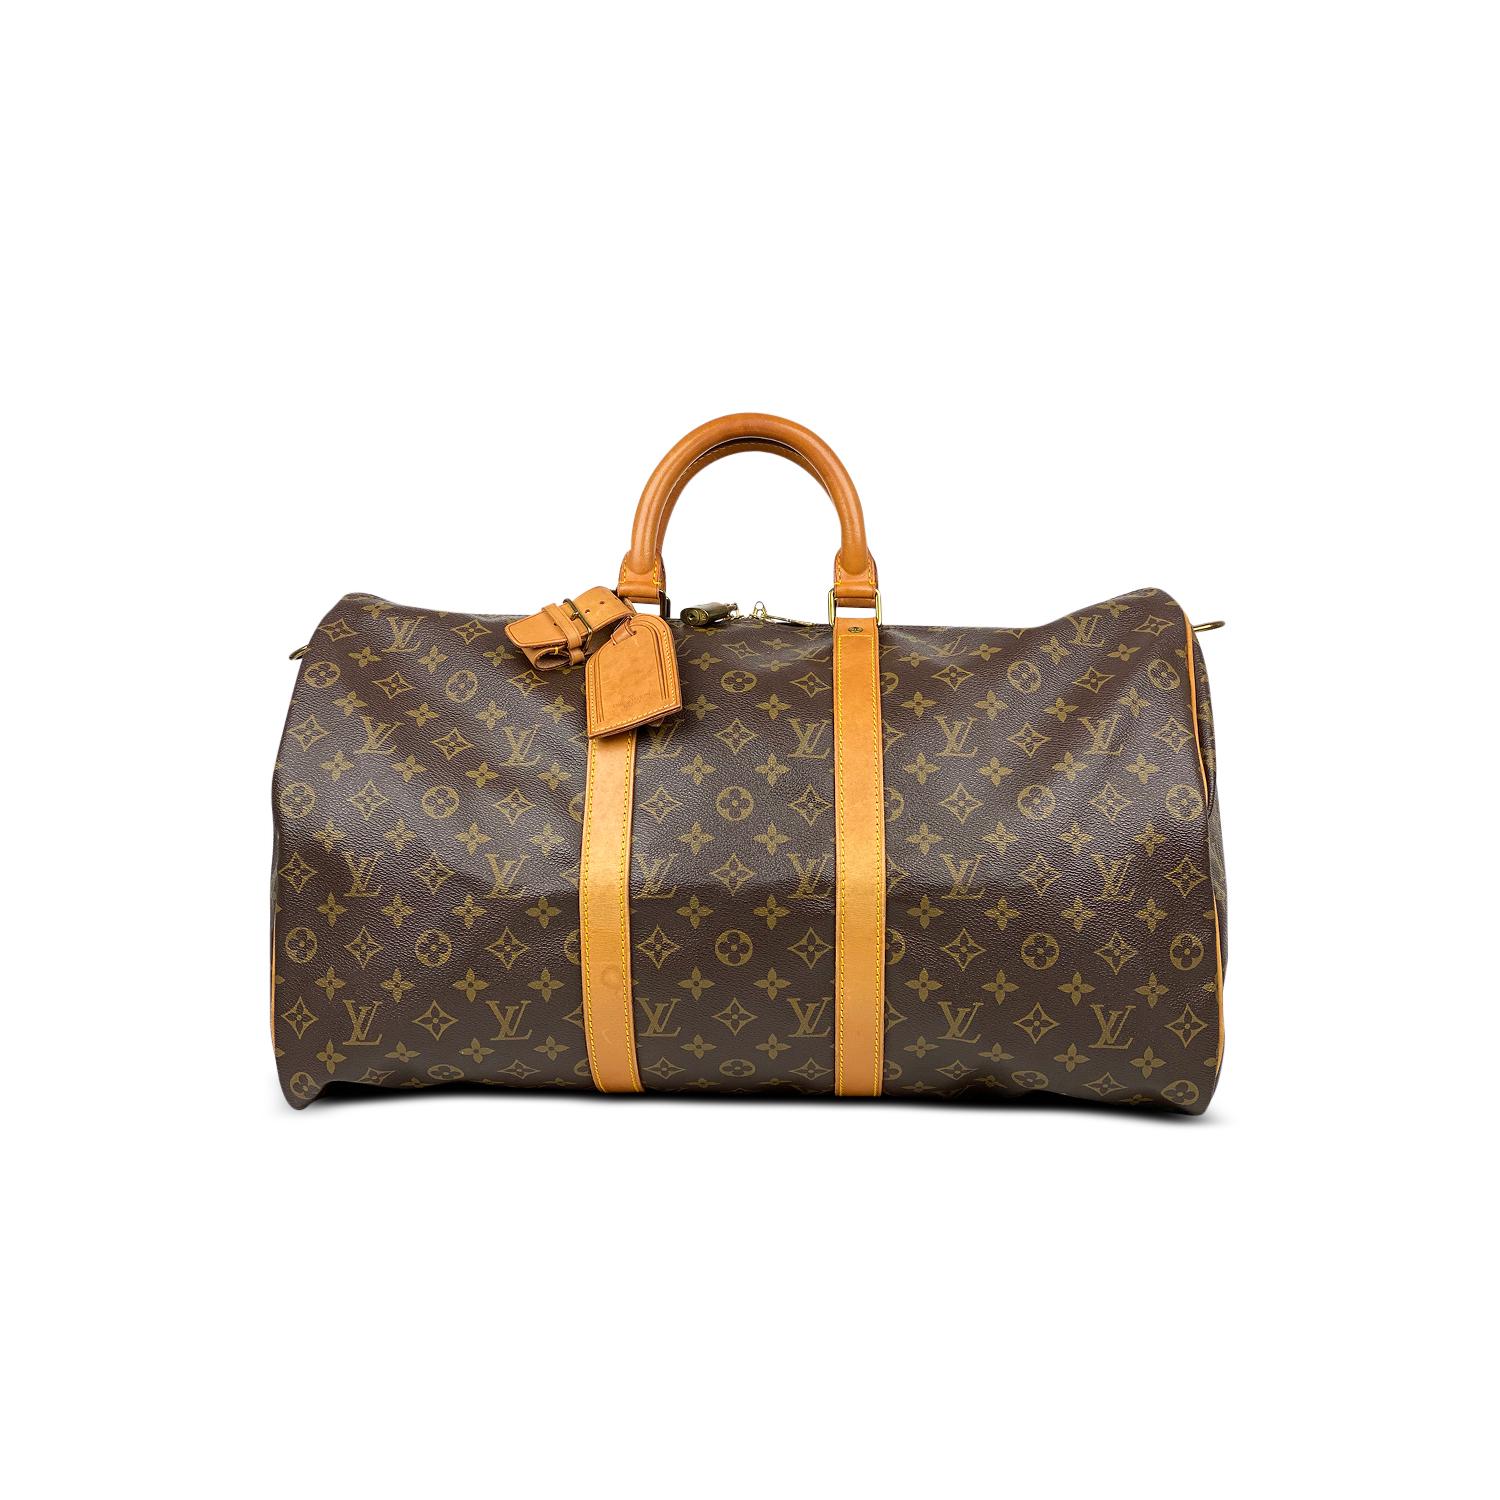 Brown and tan monogram coated canvas Louis Vuitton Keepall Bandoulière 50 with

- Brass hardware
- Tan vachetta leather trim
- Dual rolled top handles
- Tonal canvas lining and two-way zip closure at top

Overall Preloved Condition: Good

Exterior